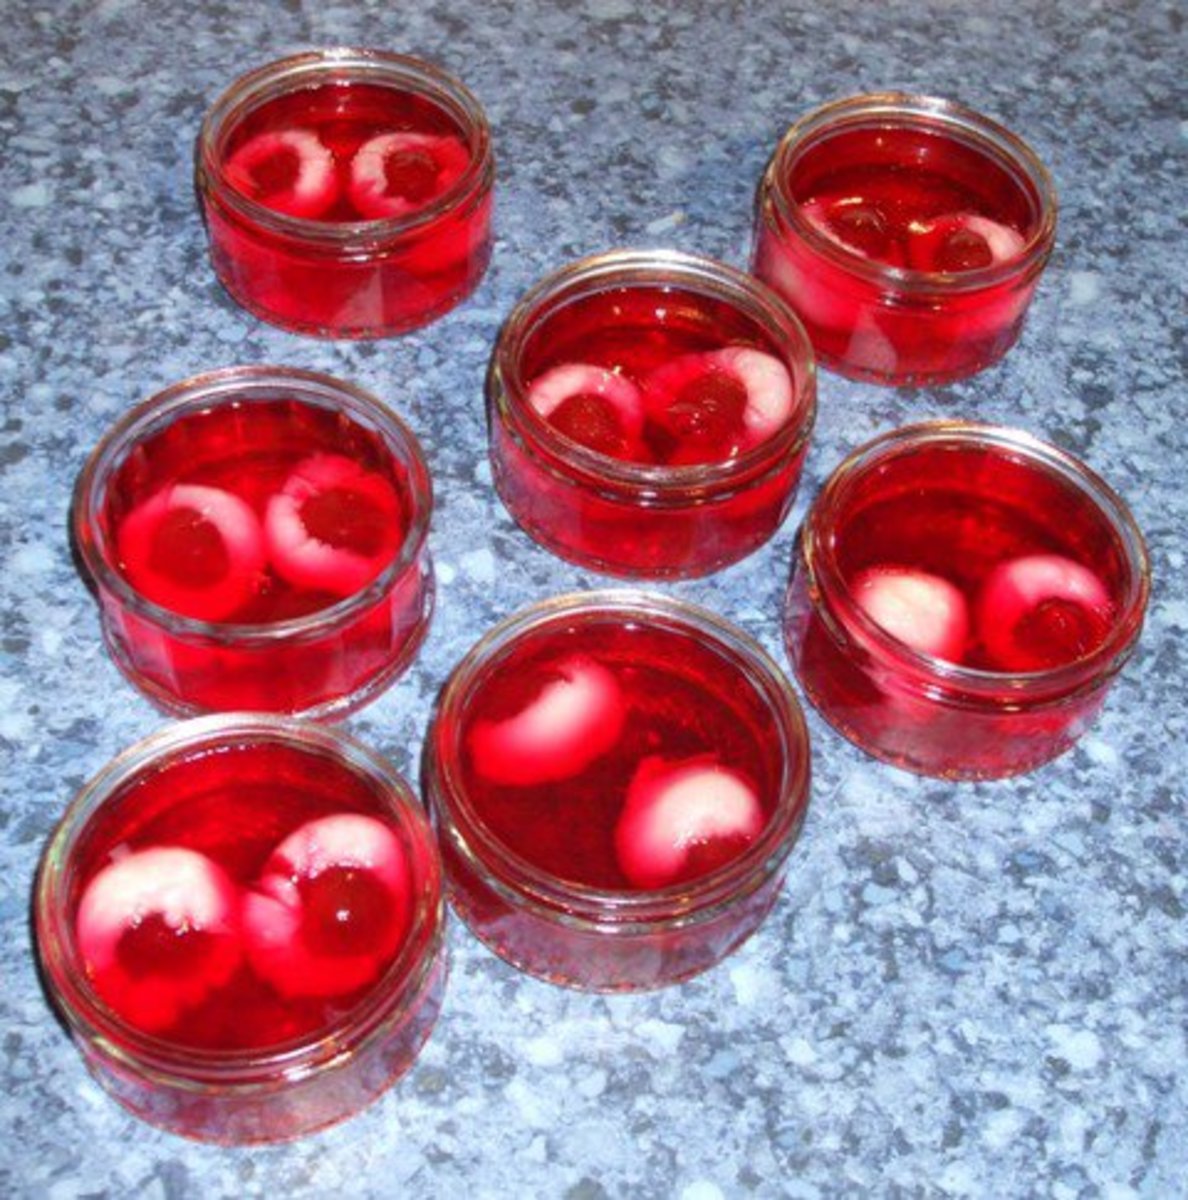 "Eyeball Jellies", made with tinned lychees stuffed with glacé cherries